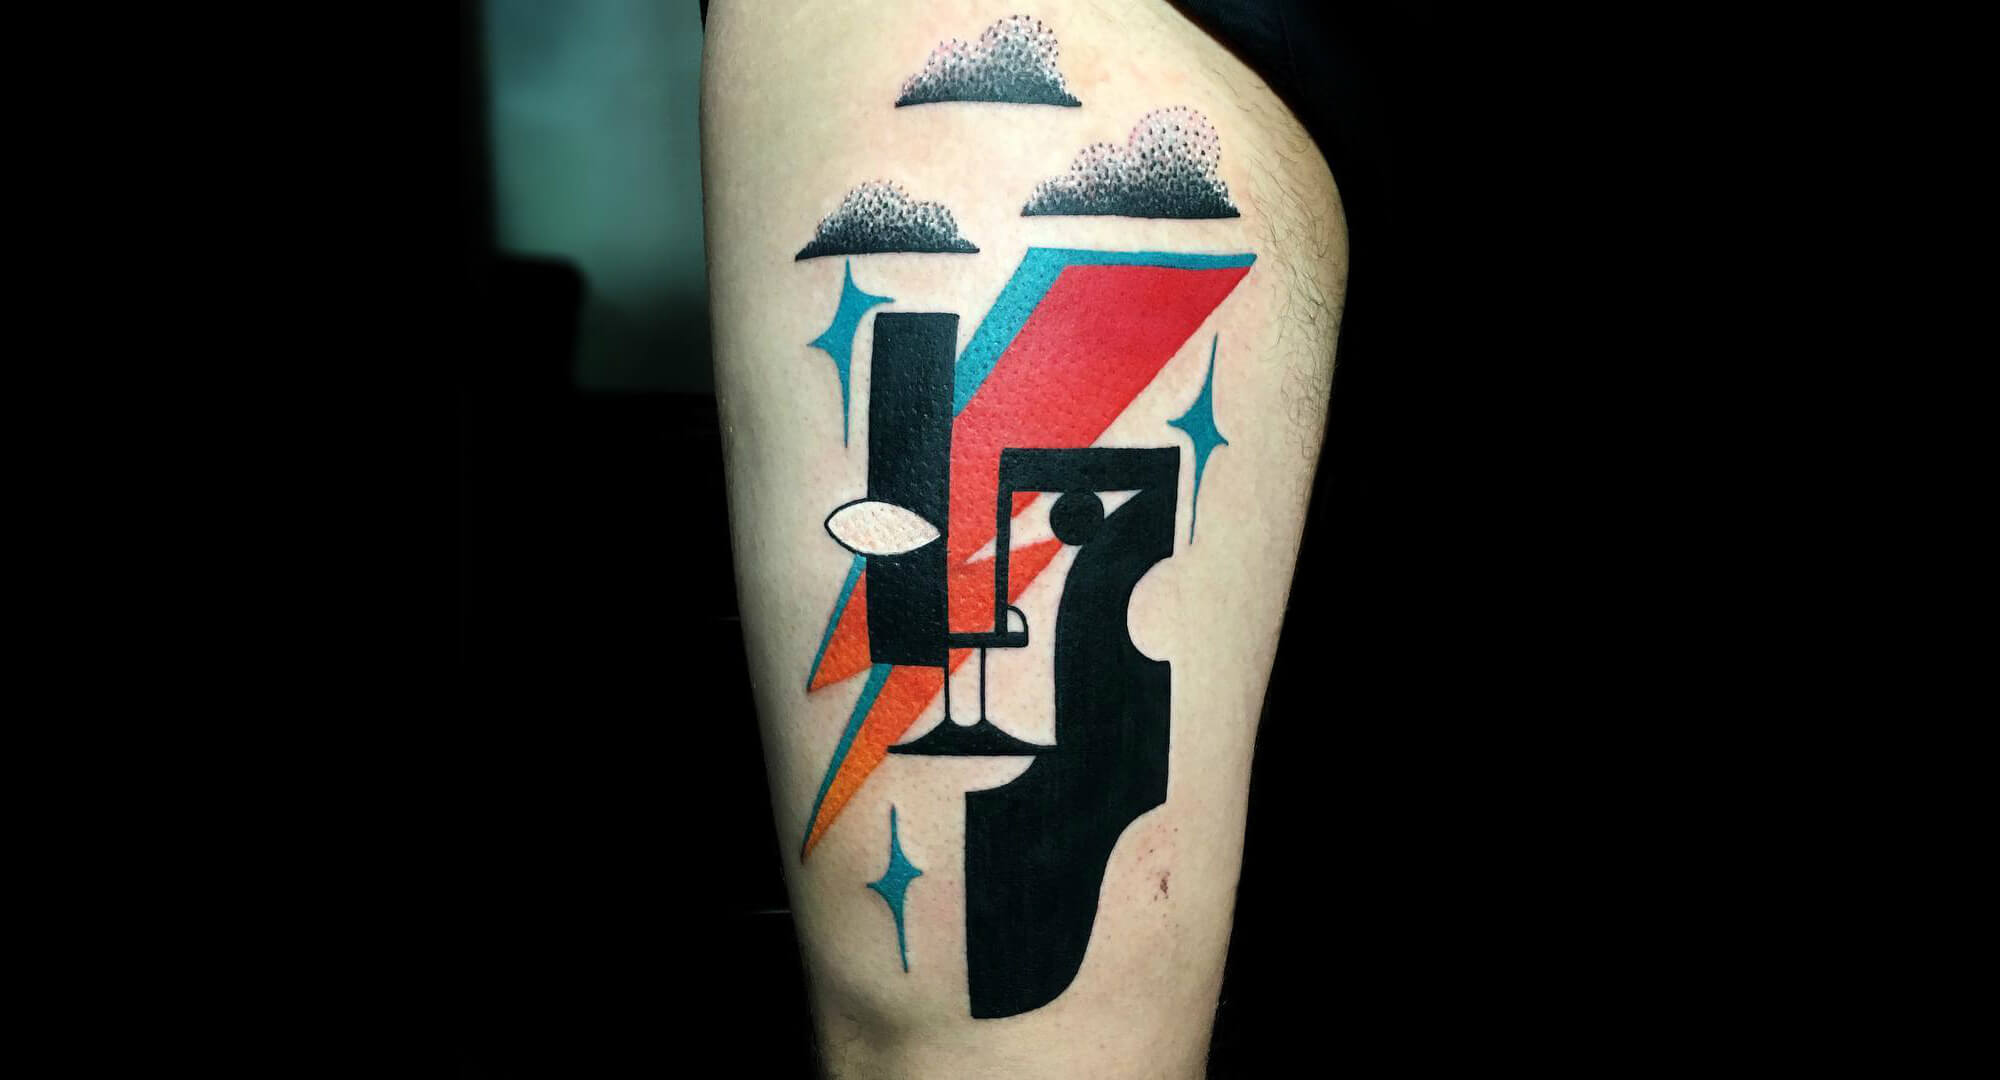 mike boyd Picasso inspired tattoos 2 (1)